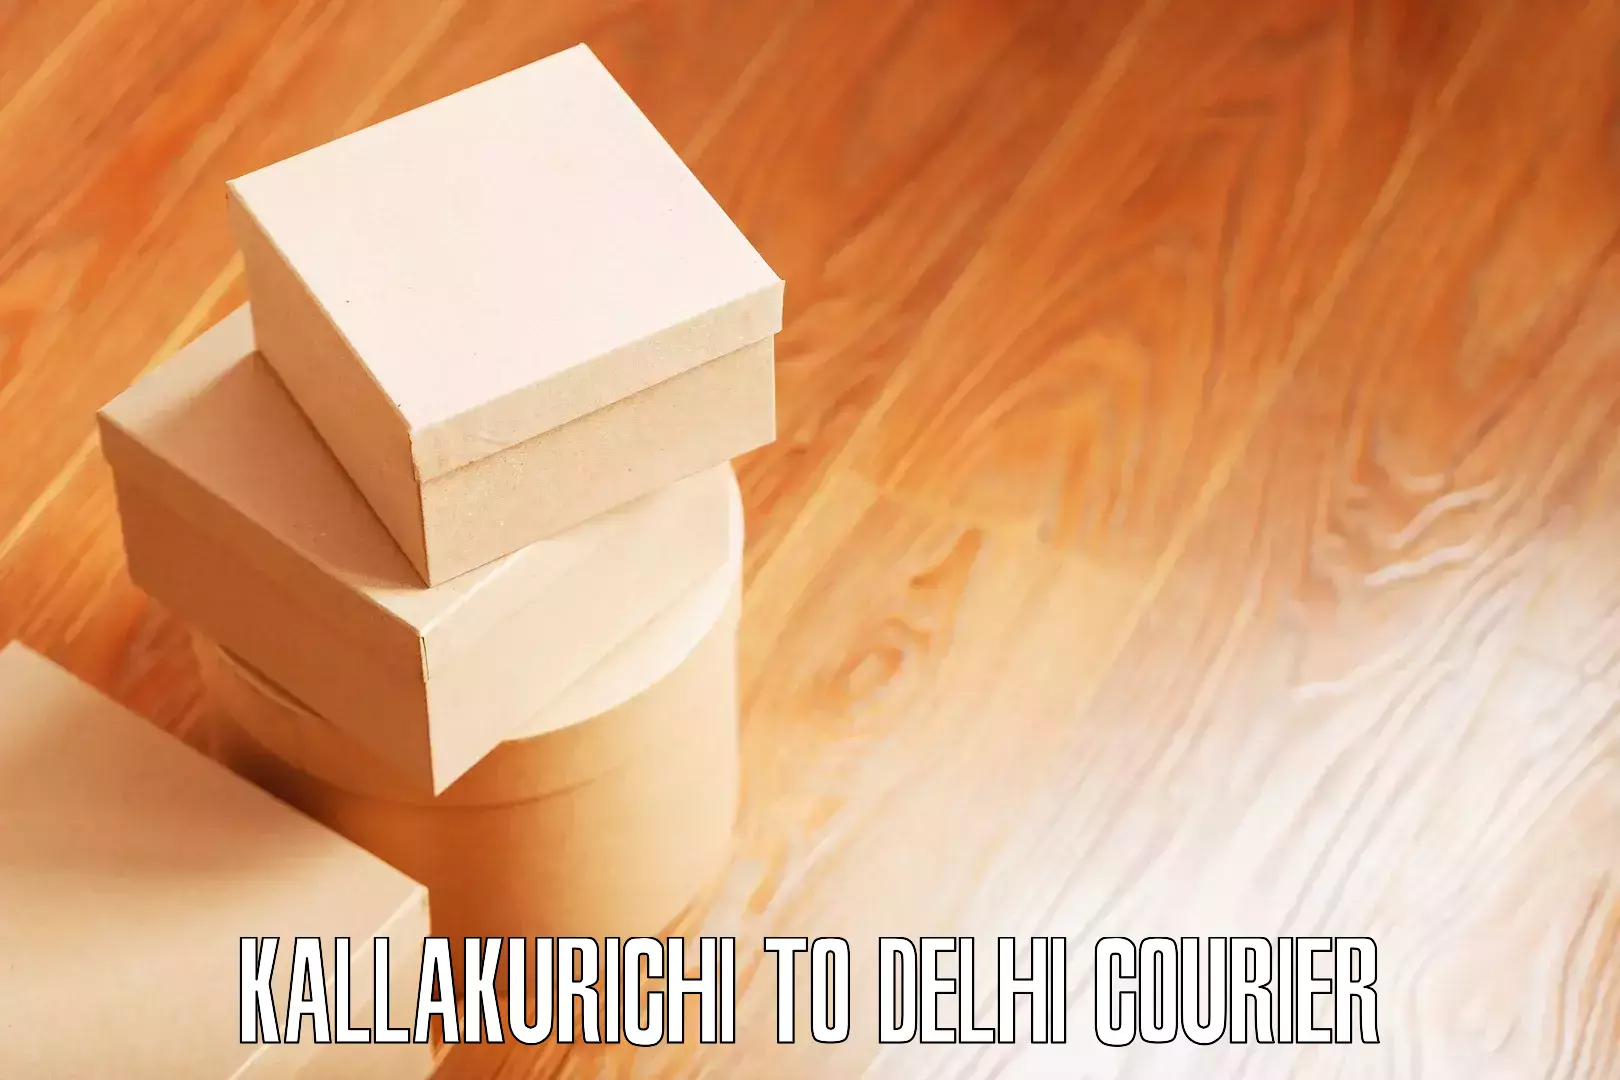 Quality moving services in Kallakurichi to Delhi